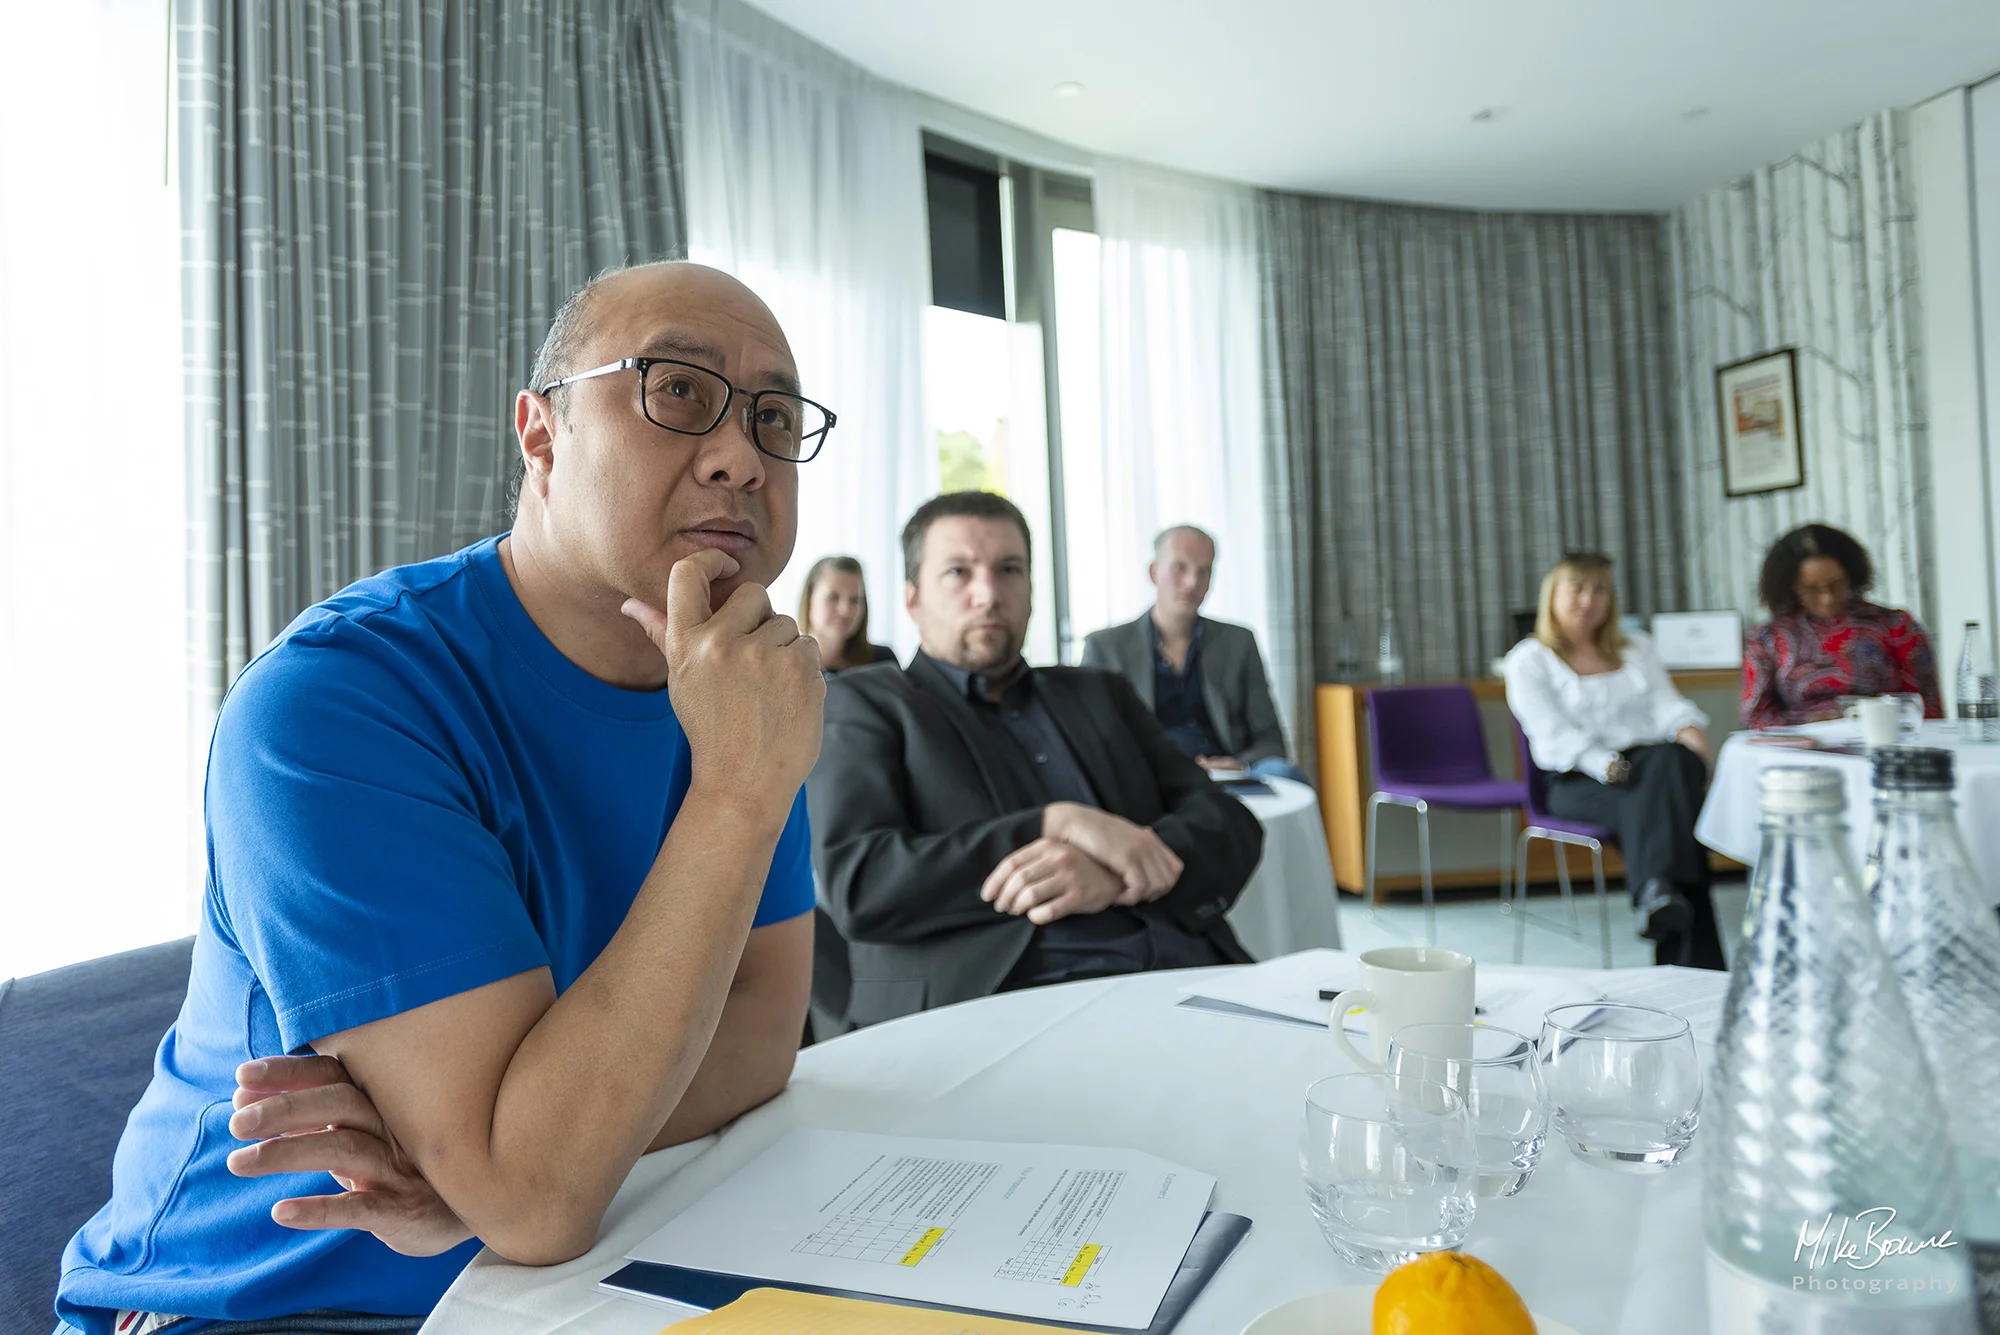 Man wearing glasses with look of concentration in a room of business people during a presentation